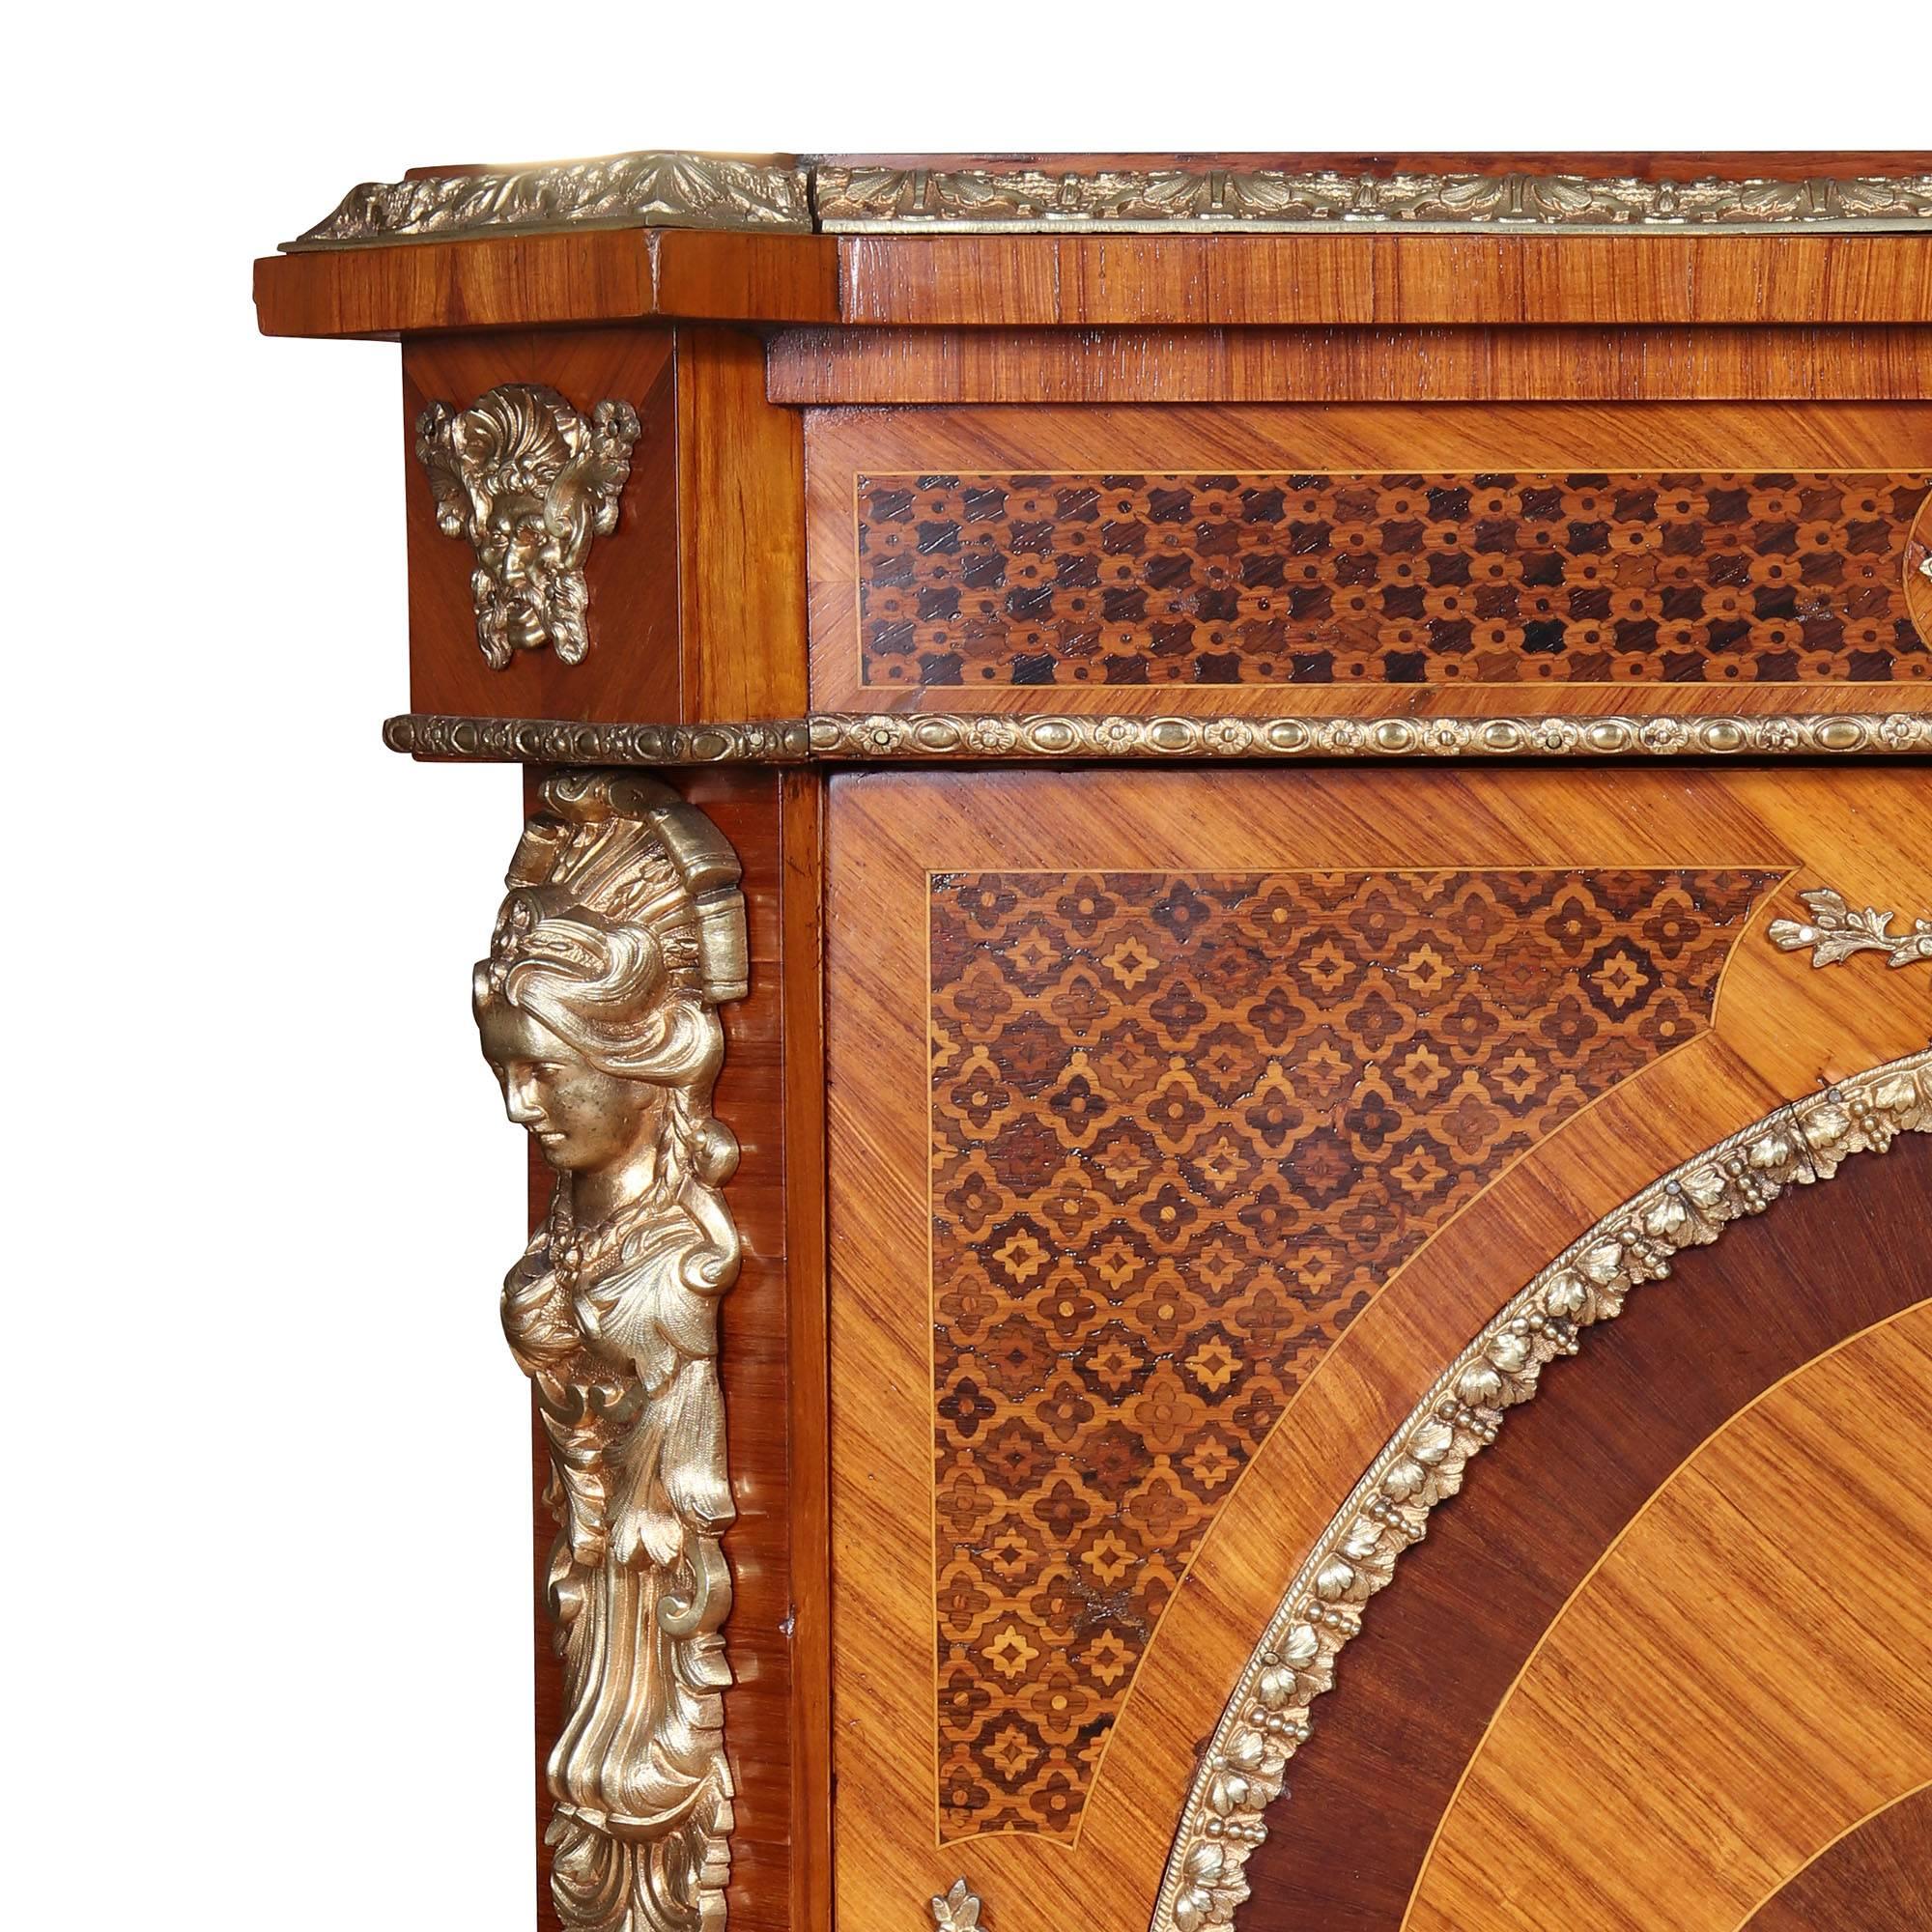 Late 19th Century Napoleon III Marquetry Side Cabinet In Excellent Condition For Sale In London, by appointment only